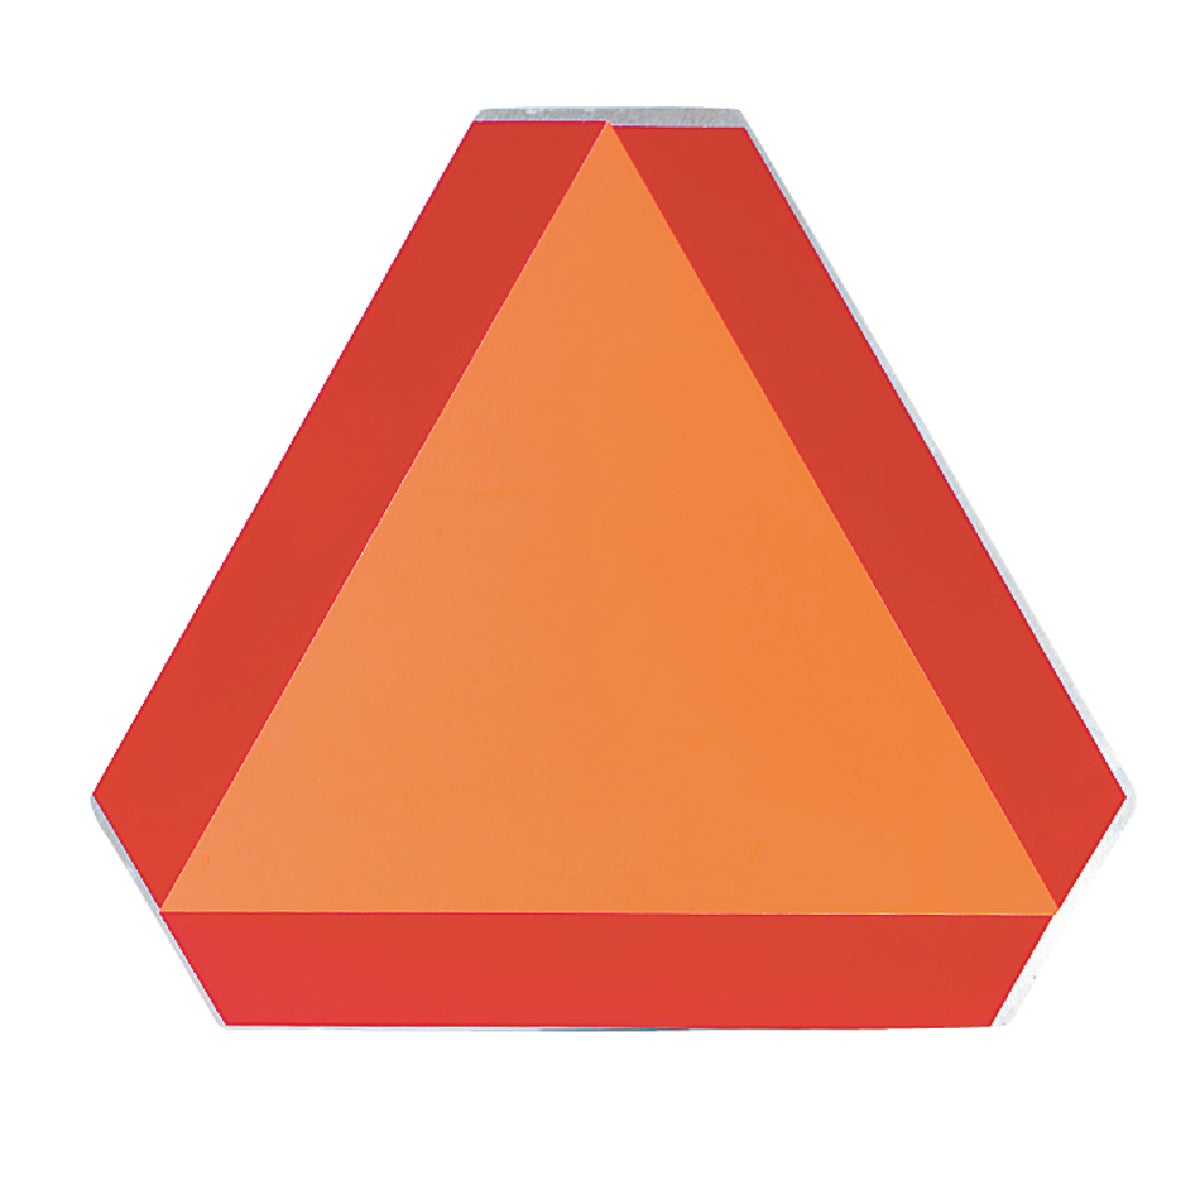 Item 579715, During daylight, the bright fluorescent orange solid triangle in center of 